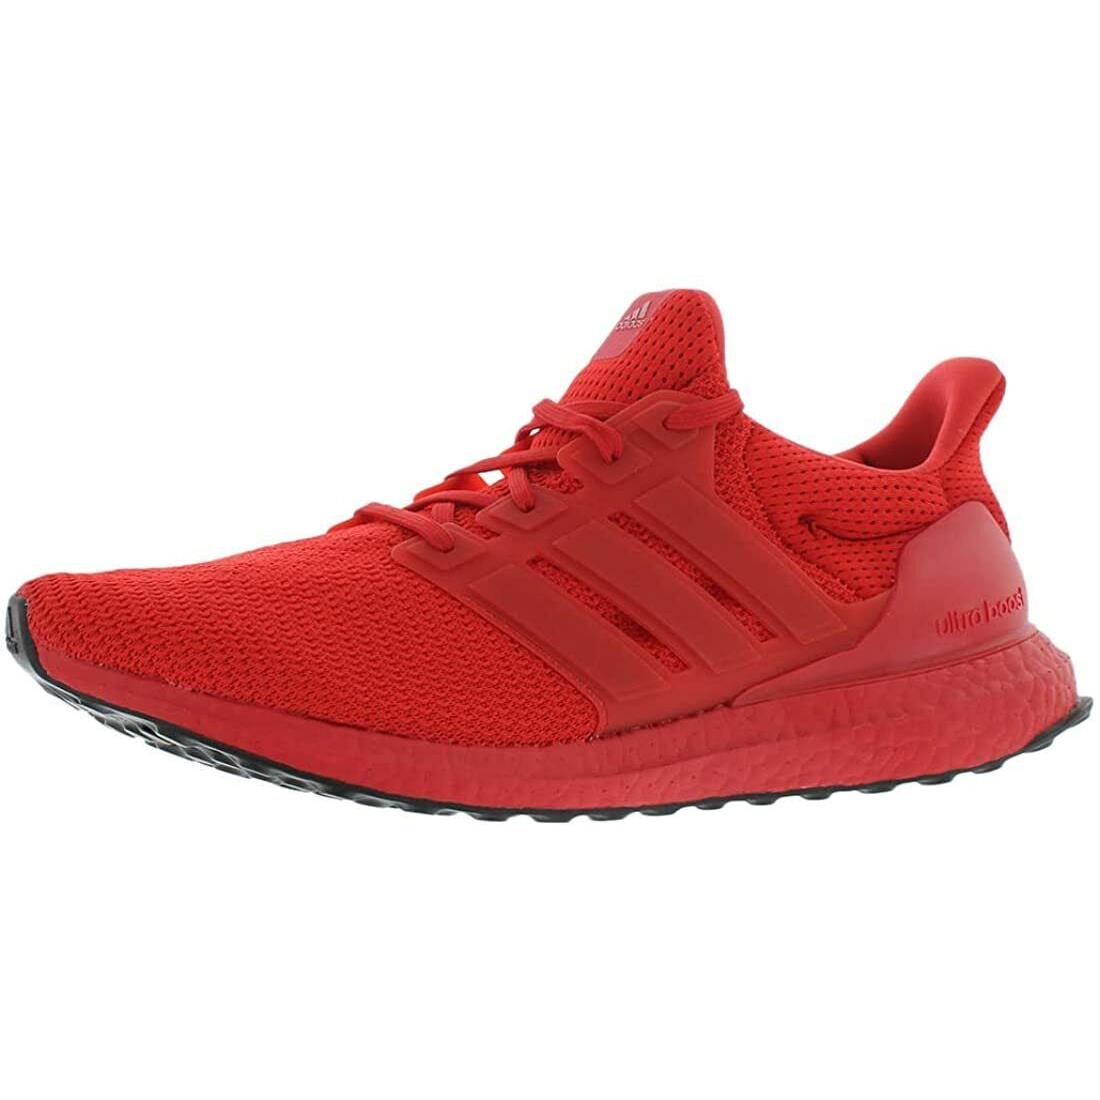 Adidas Ultraboost Dna Red Running Shoes Fy7123 Men Size